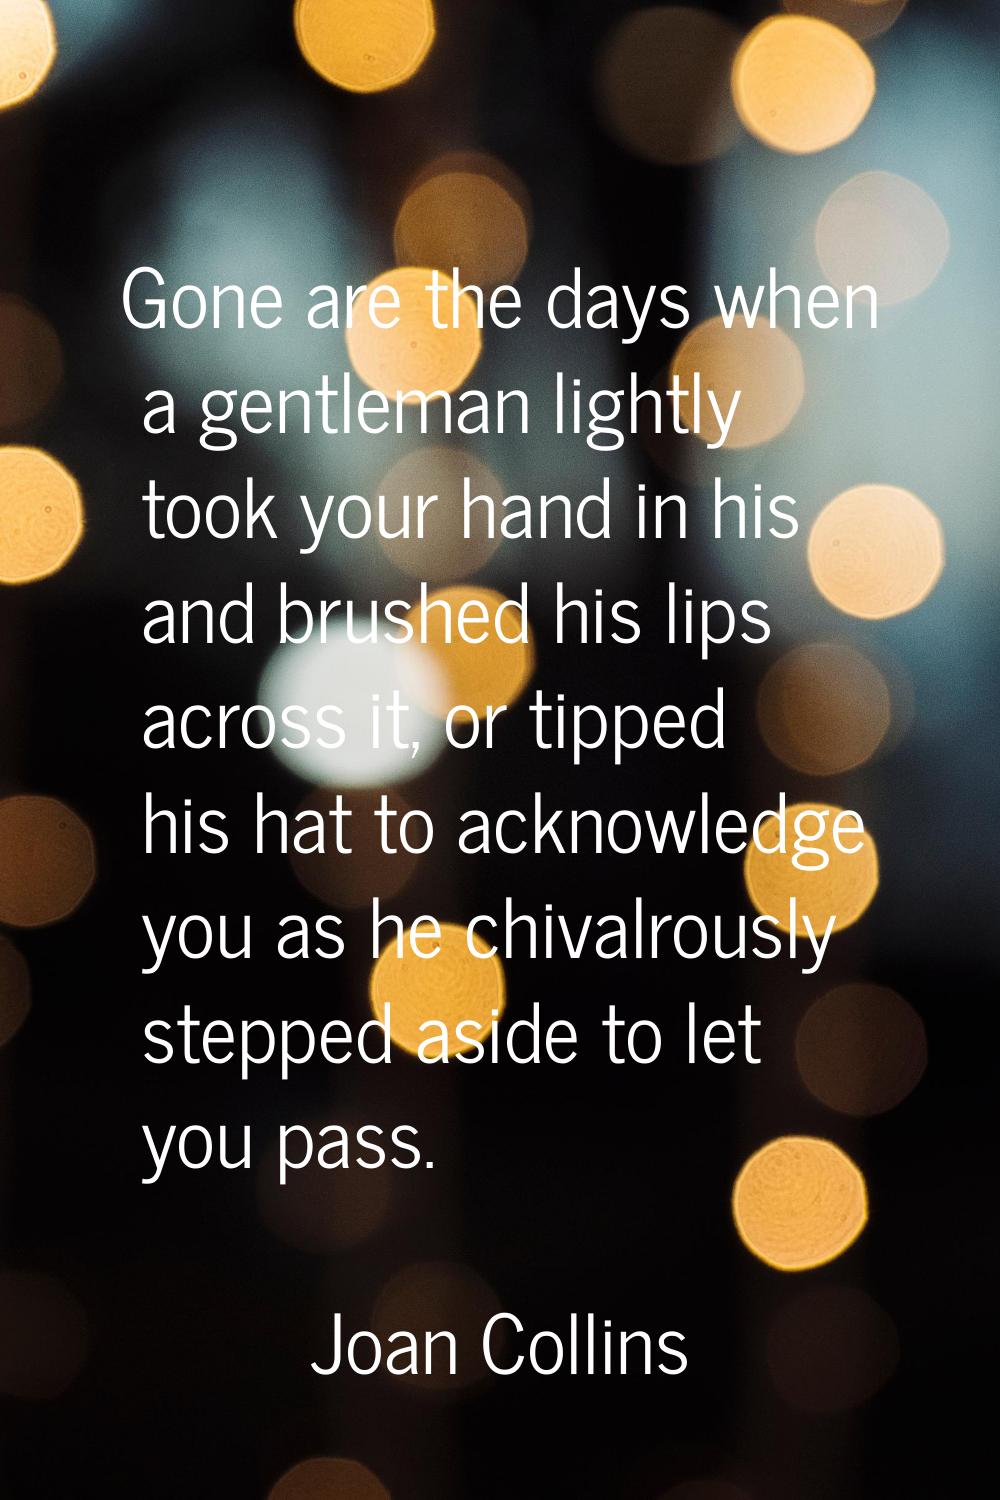 Gone are the days when a gentleman lightly took your hand in his and brushed his lips across it, or